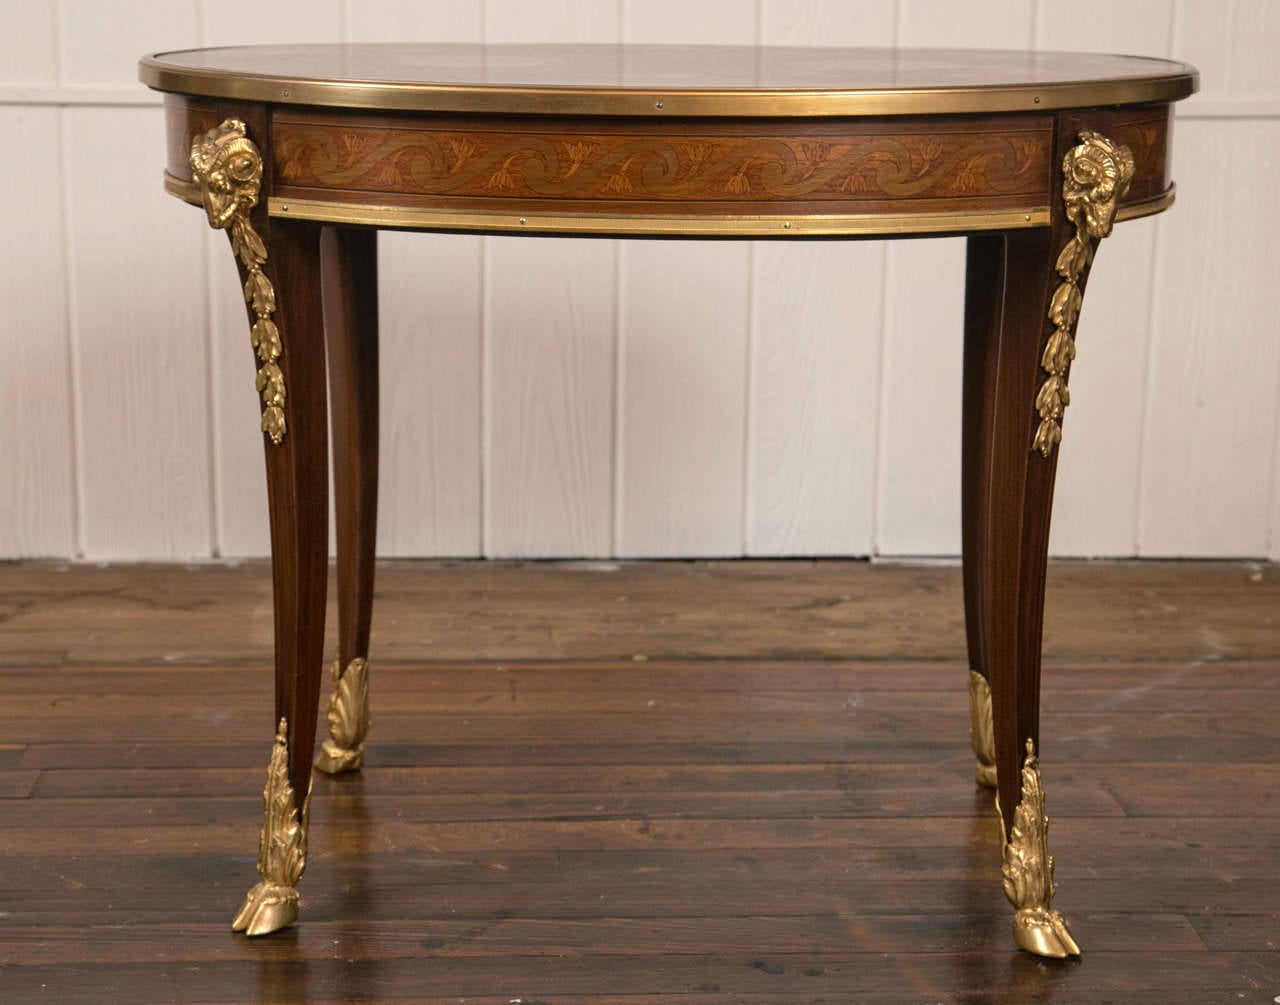 A lovely marquetry inlaid low table, with good bronze mounts, including ram's heads and hoof feet.